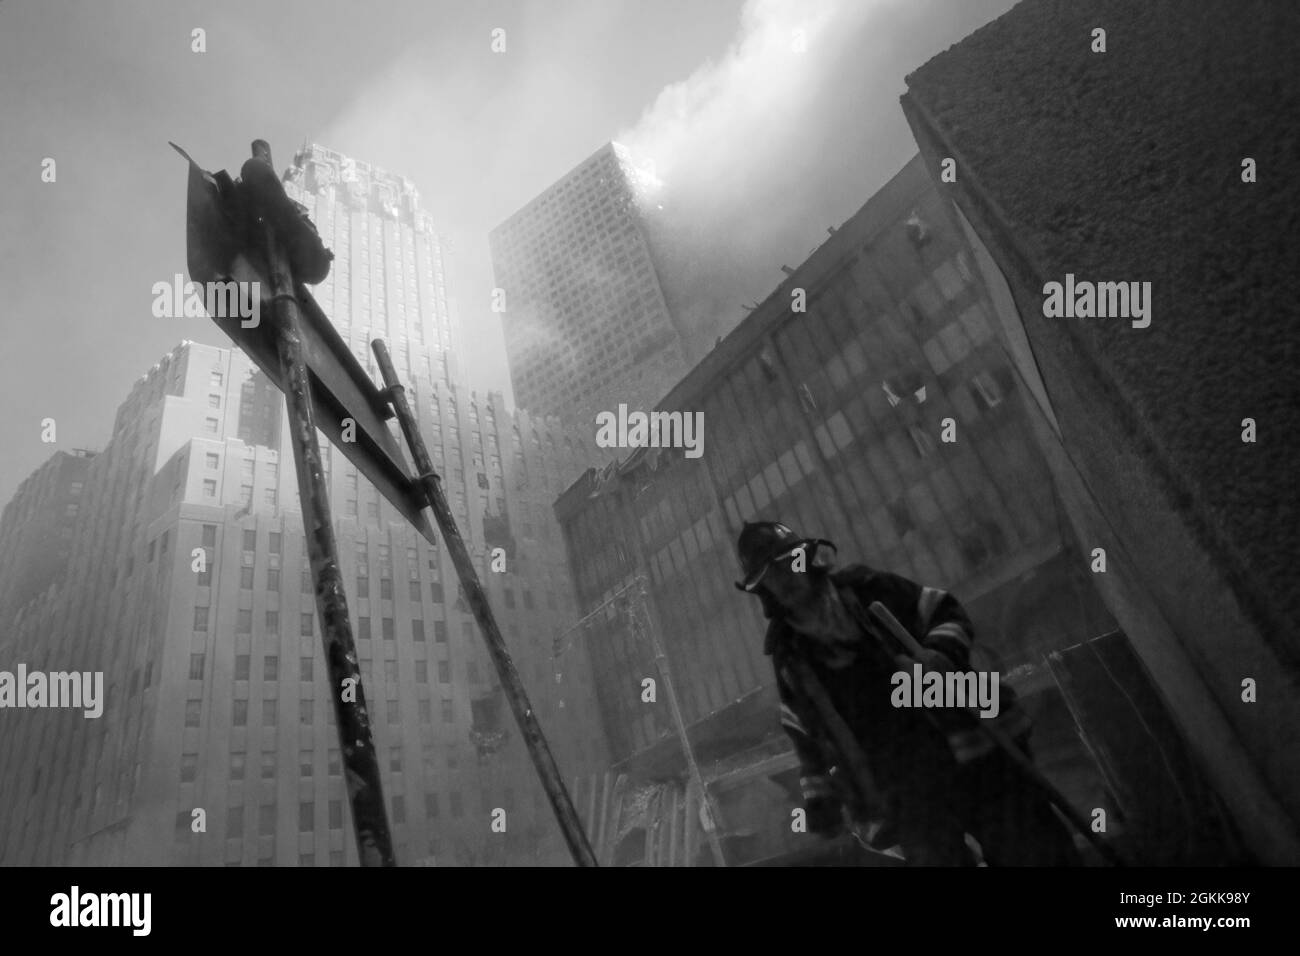 FDNY firefighter emerging from the smoke in New York City while the Twin Towers burn during the attack by Islamic terrorists on September 11, 2021. (USA) Stock Photo